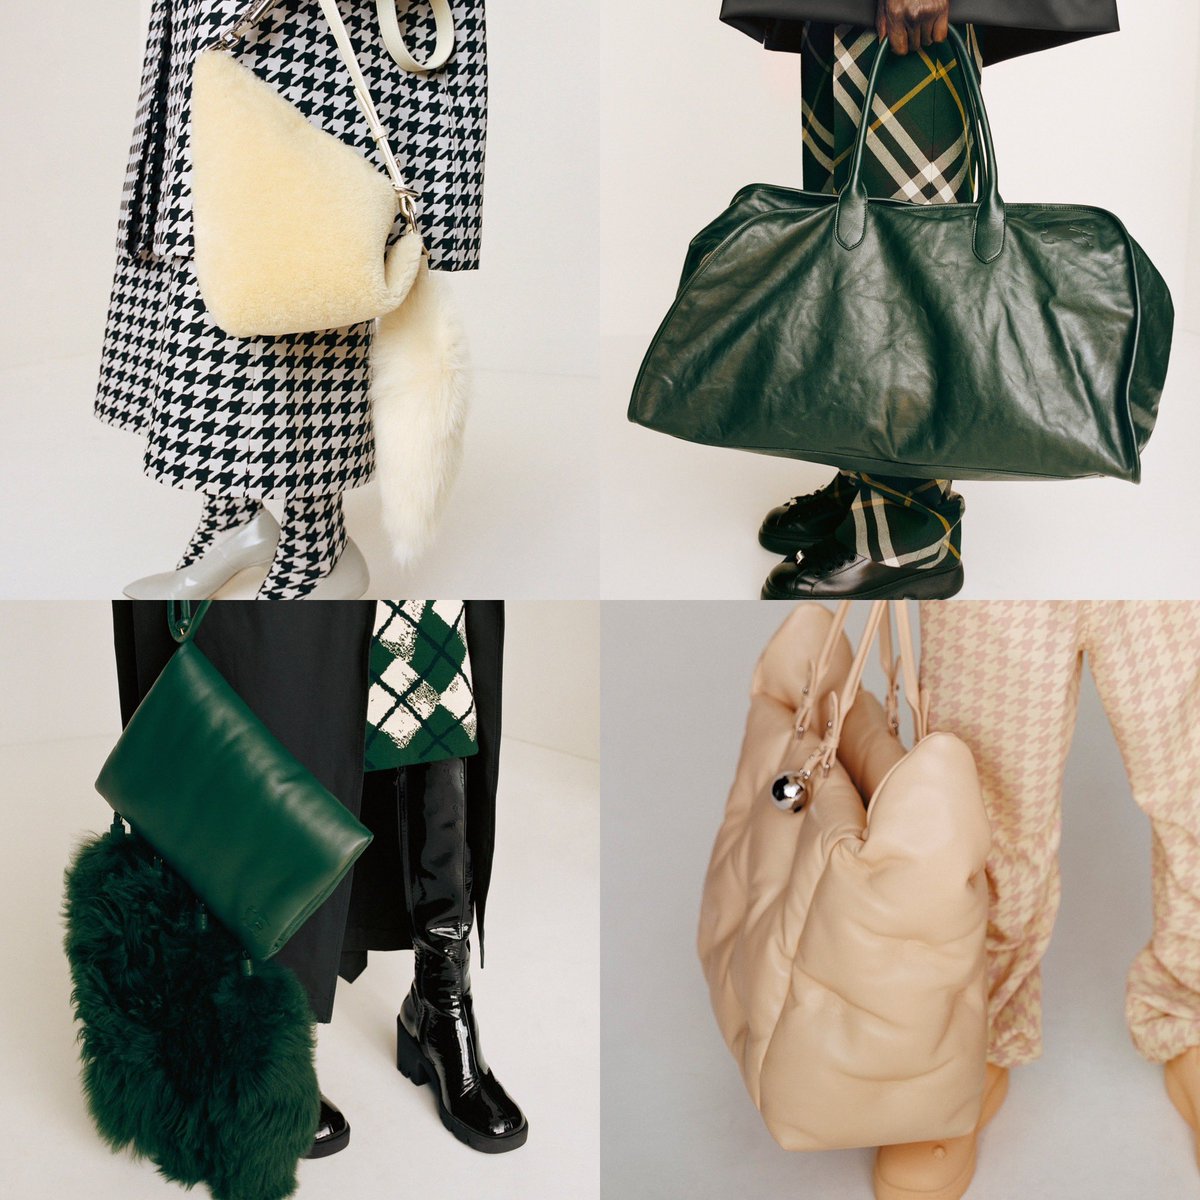 Bags from Burberry by Daniel Lee